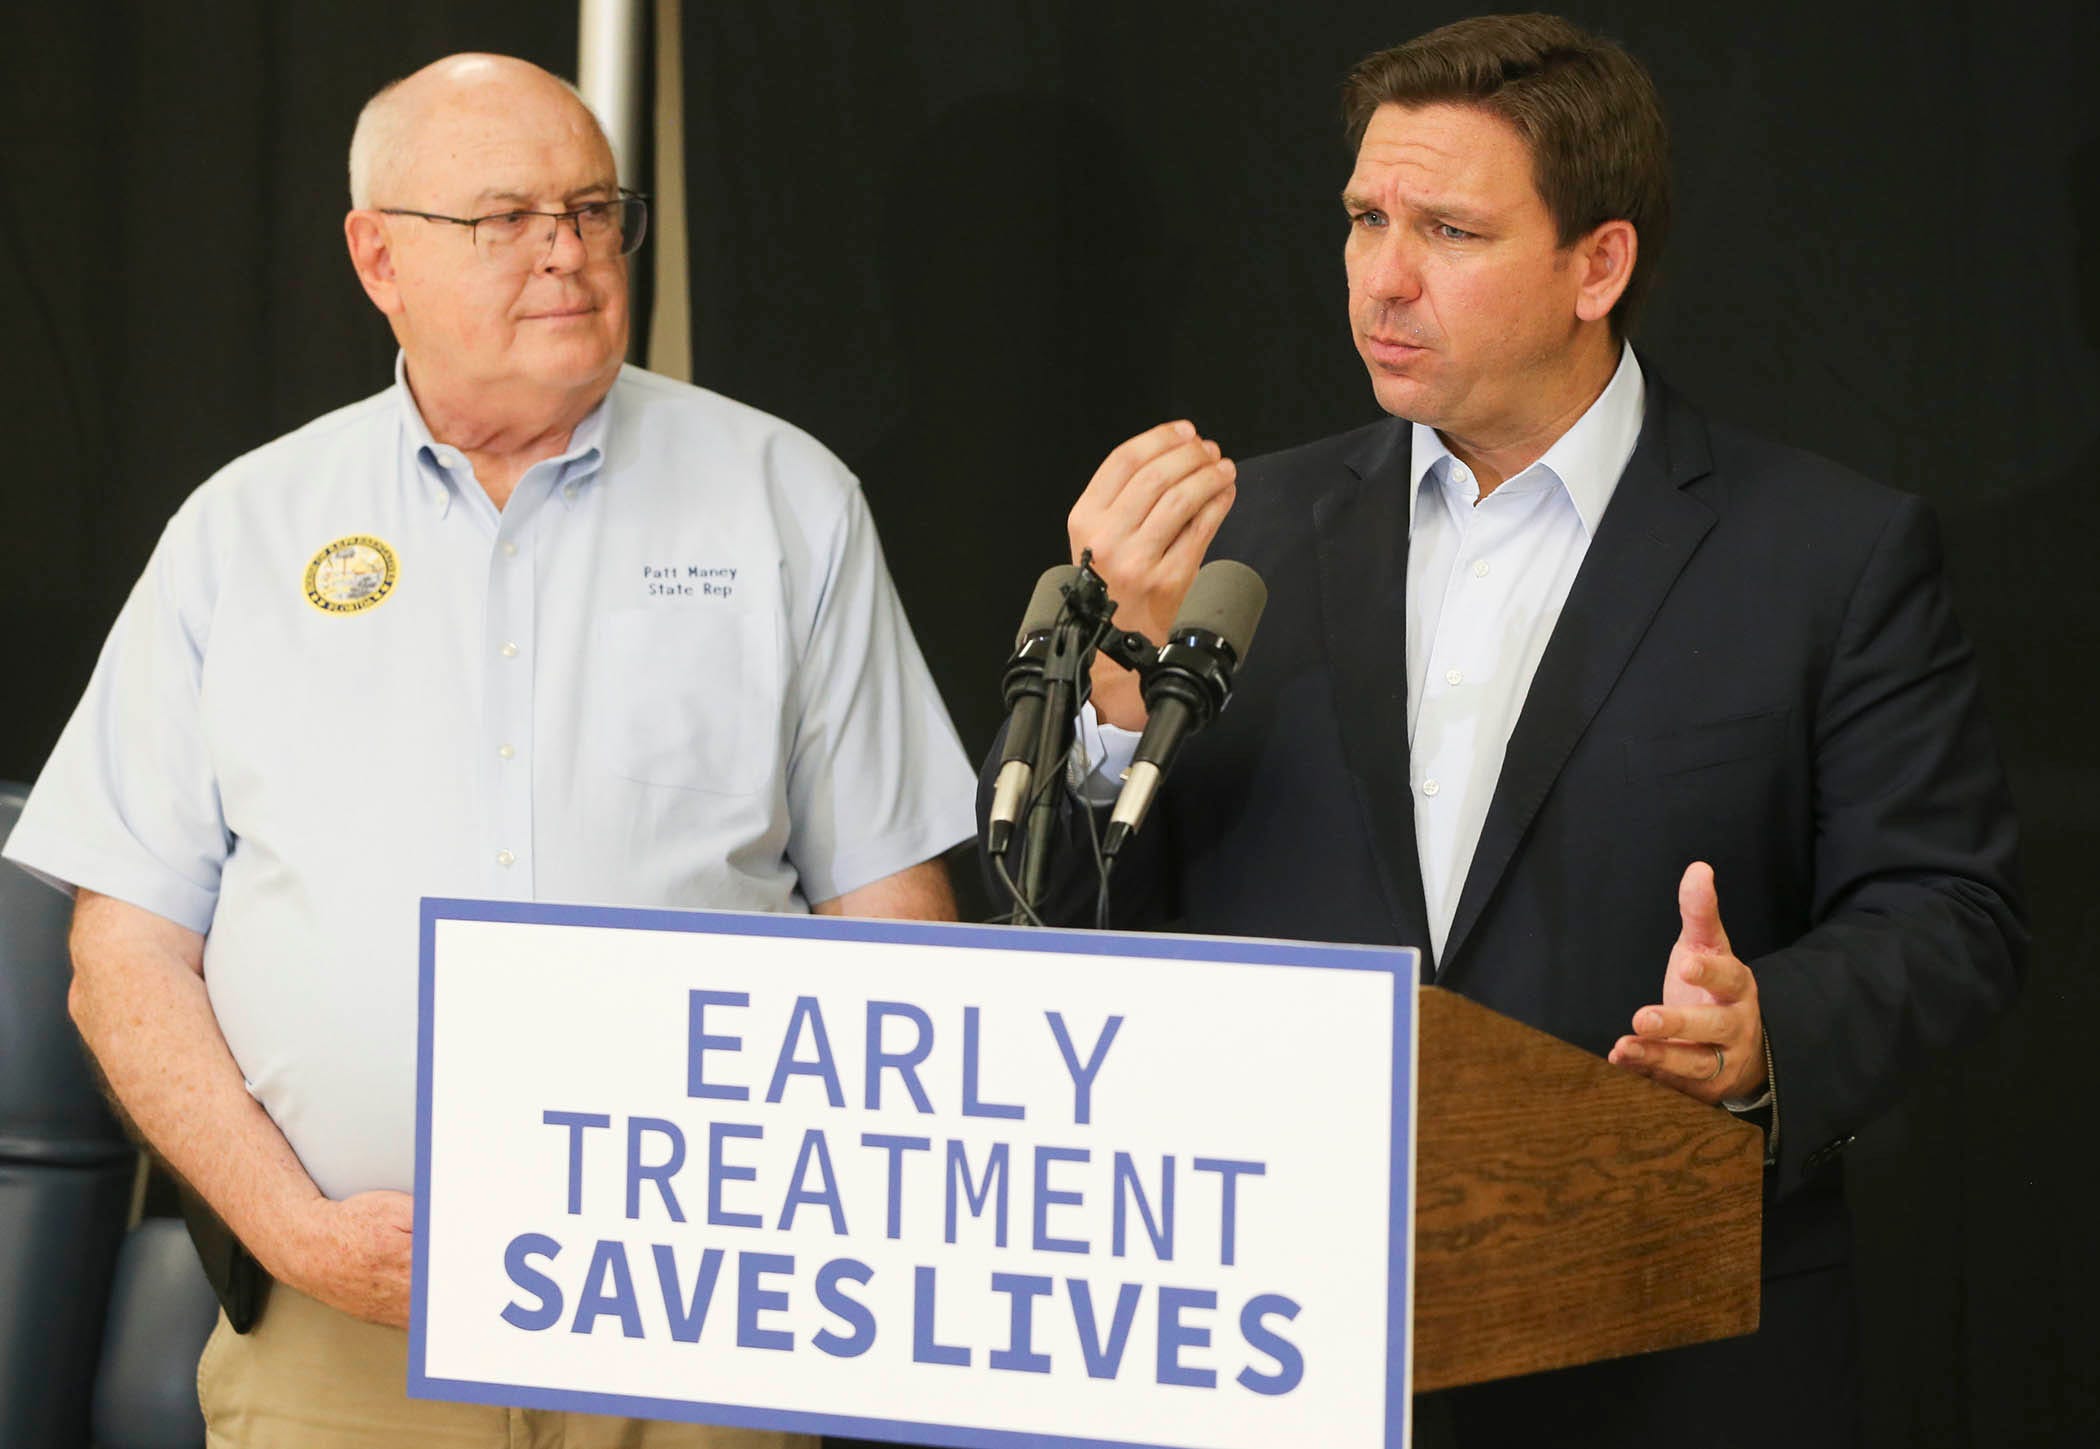 Governor Ron DeSantis, along with Florida House Representative T. Patt Maney, announces that the State of Florida has opened a new monoclonal antibody therapy treatment site at the Northwest Florida Fairgrounds in Fort Walton Beach. This location will be the ninth state monoclonal antibody therapy treatment site to open.